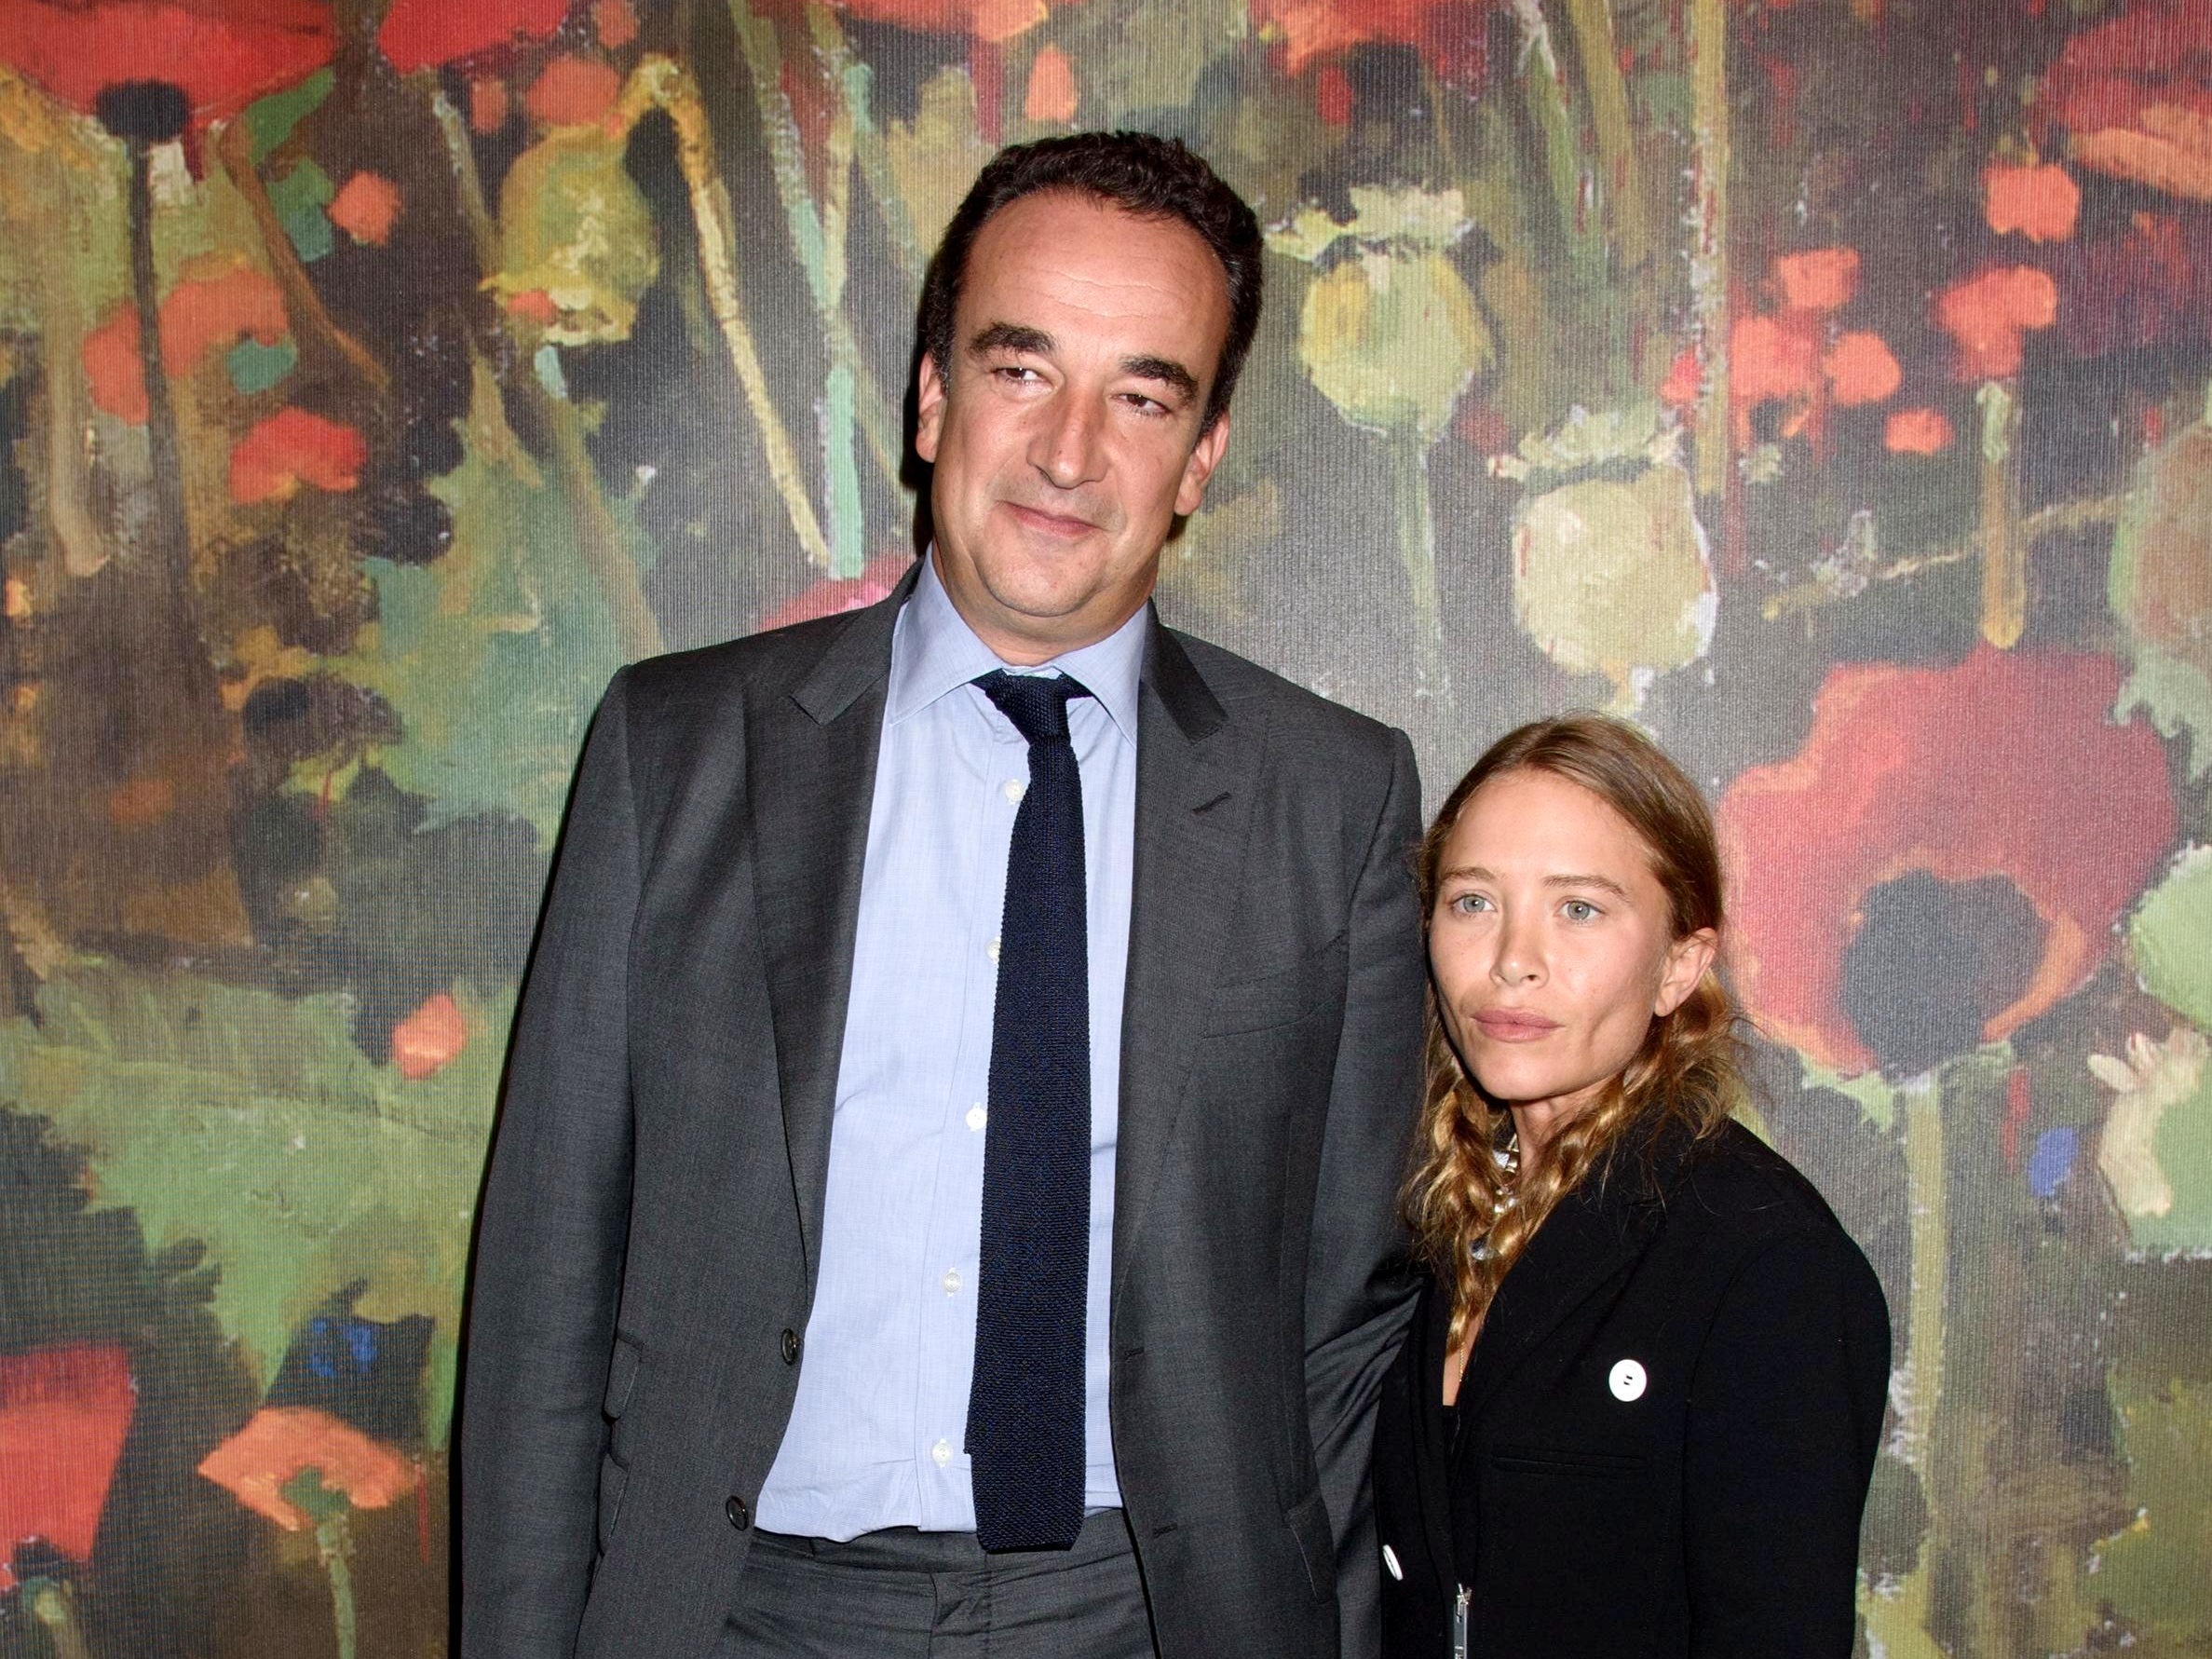 Mary-Kate and ex-husband Olivier Sarkozy 'finalise divorce via | The Independent